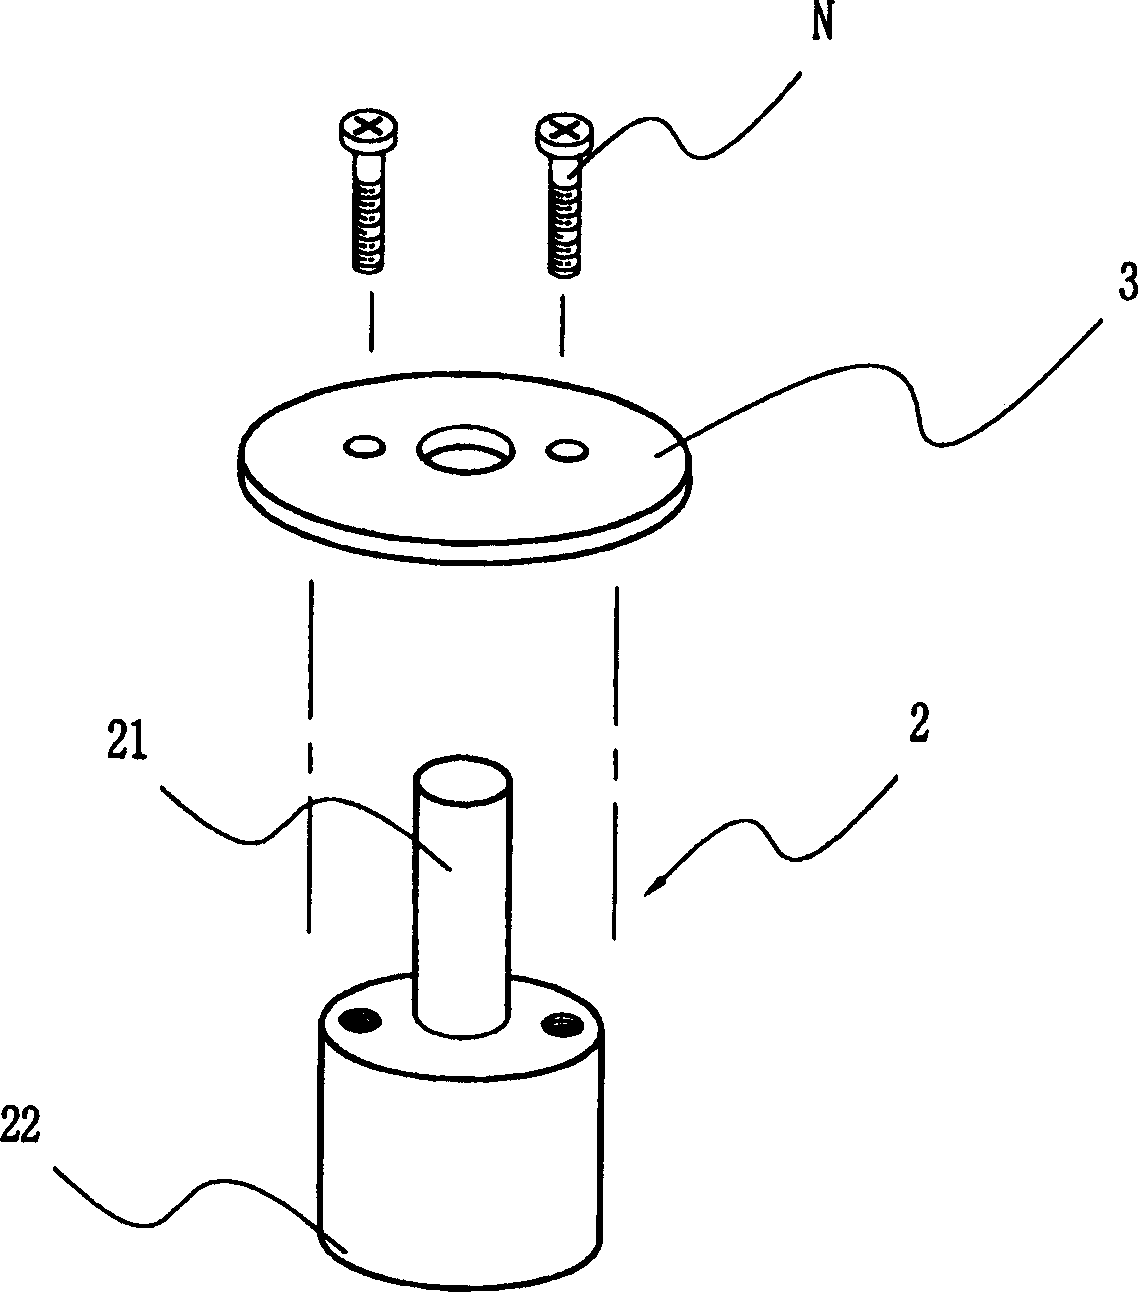 Device for manufacturing opening on ink powder/selenium cartrige for refilling and refilling method